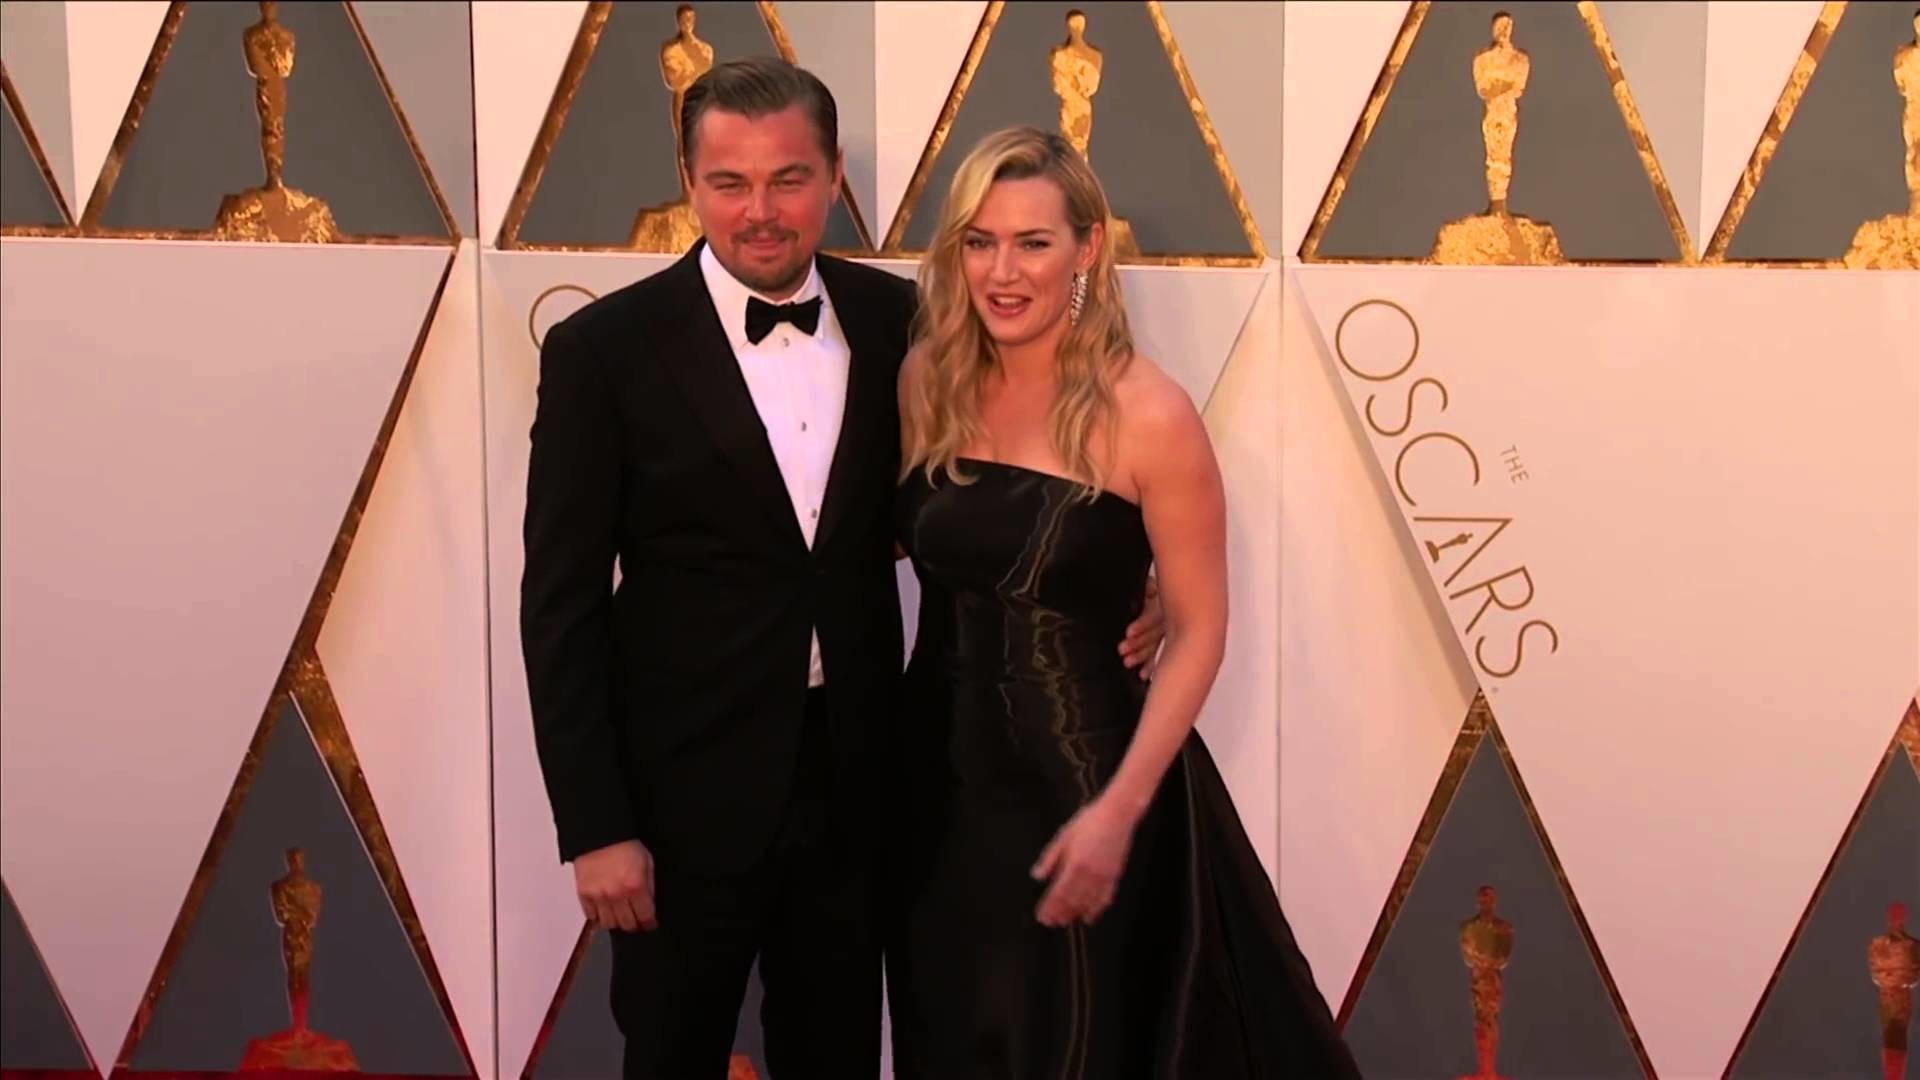 1920x1080 Kate Winslet and Leonardo DiCaprio on Red Carpet - Oscars 2016 (Part 1) -  YouTube